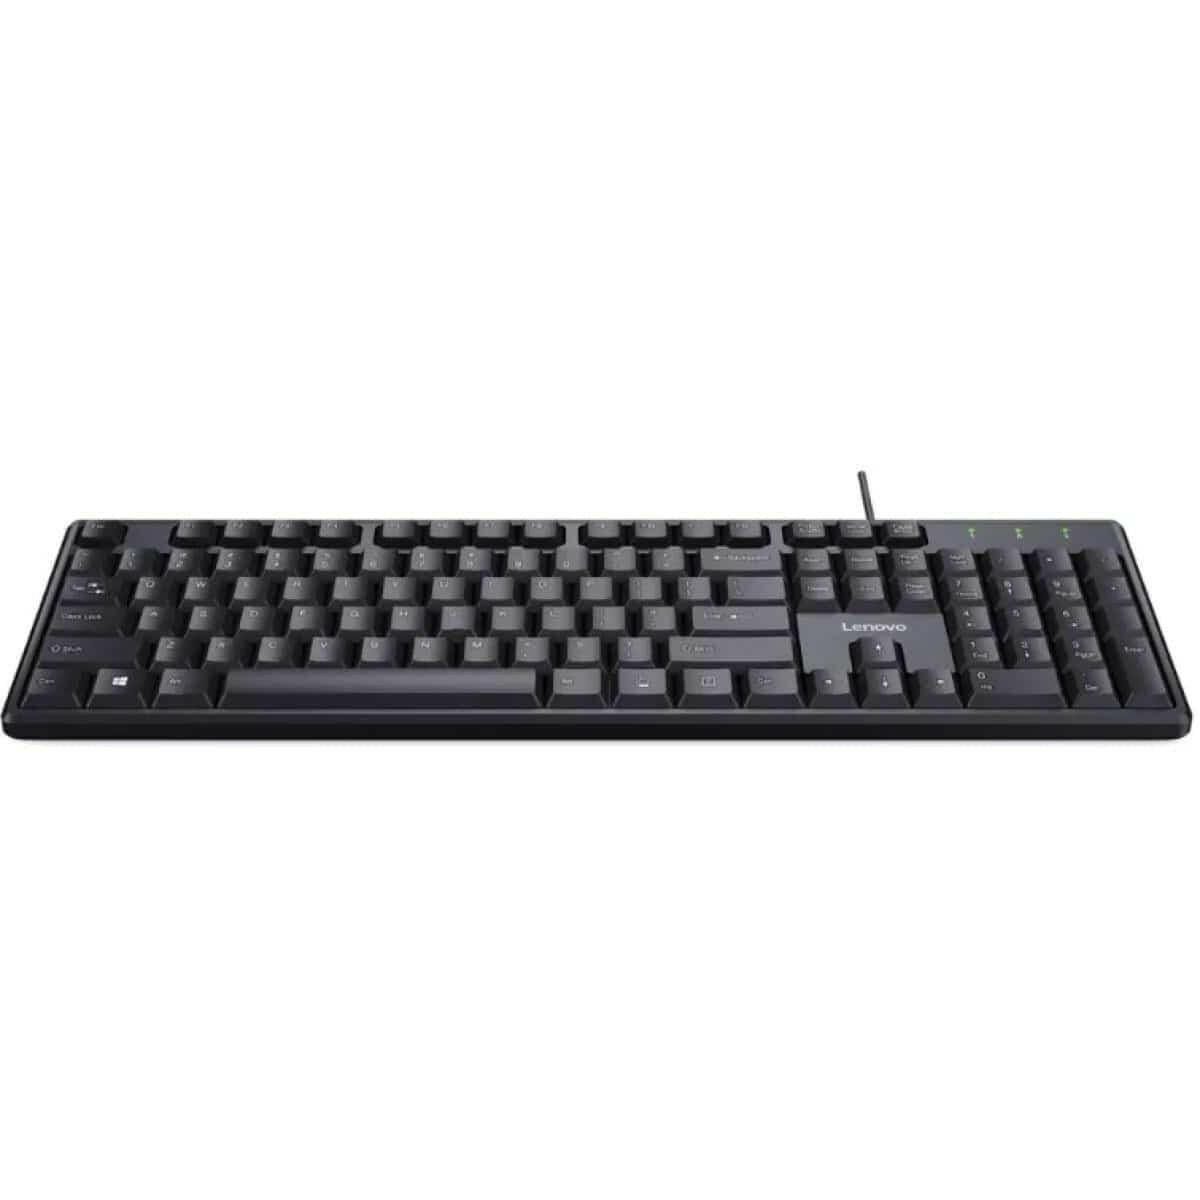 LENOVO accesories Lenovo MK11 Business Wired Keyboard and Mouse Set